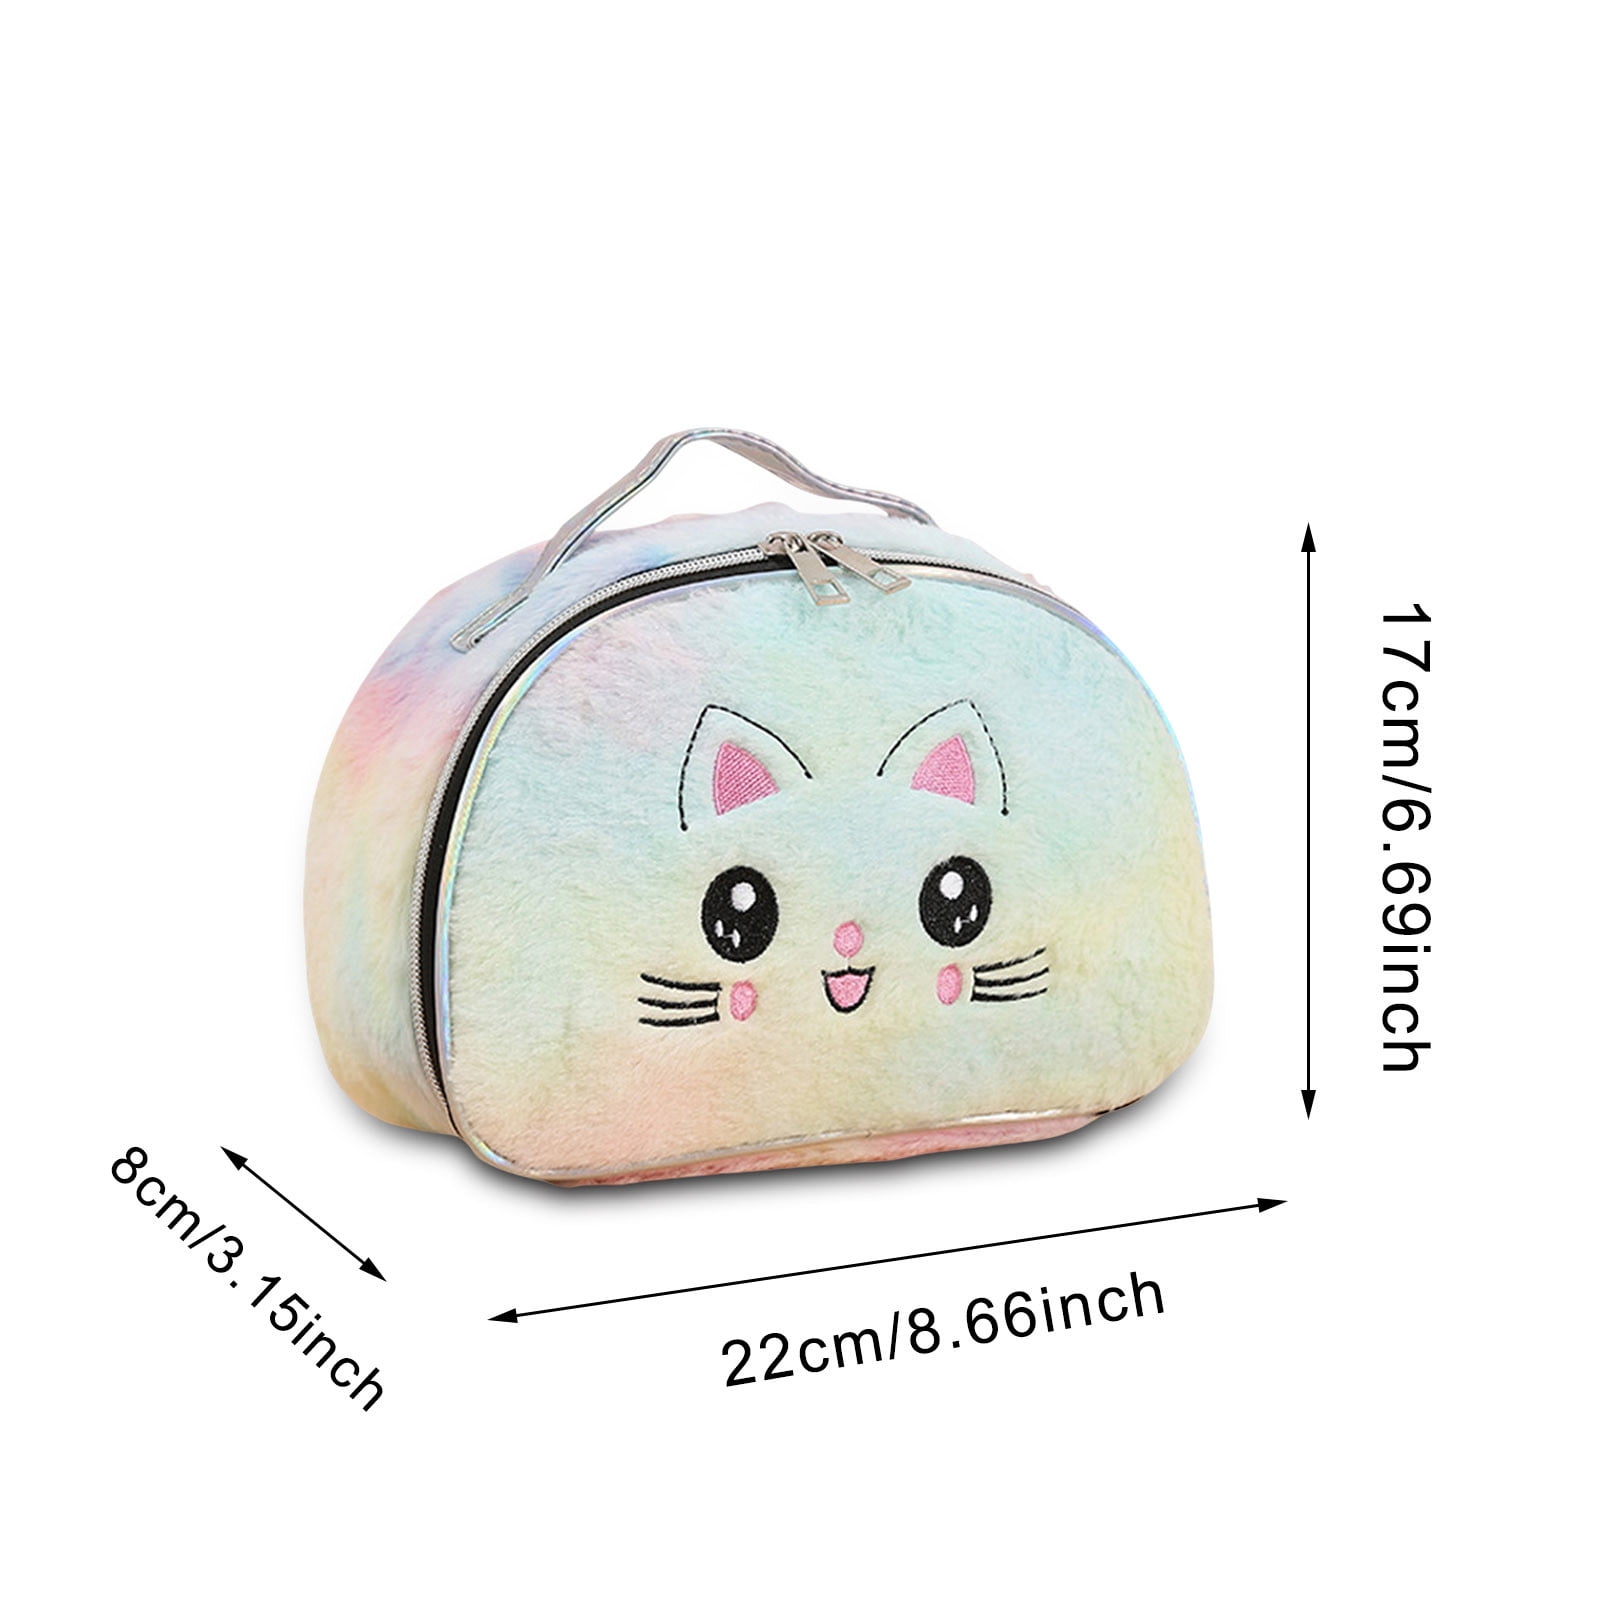 Plush Cosmetic Bag Portable Cute Makeup Pouch Soft Wool Travel